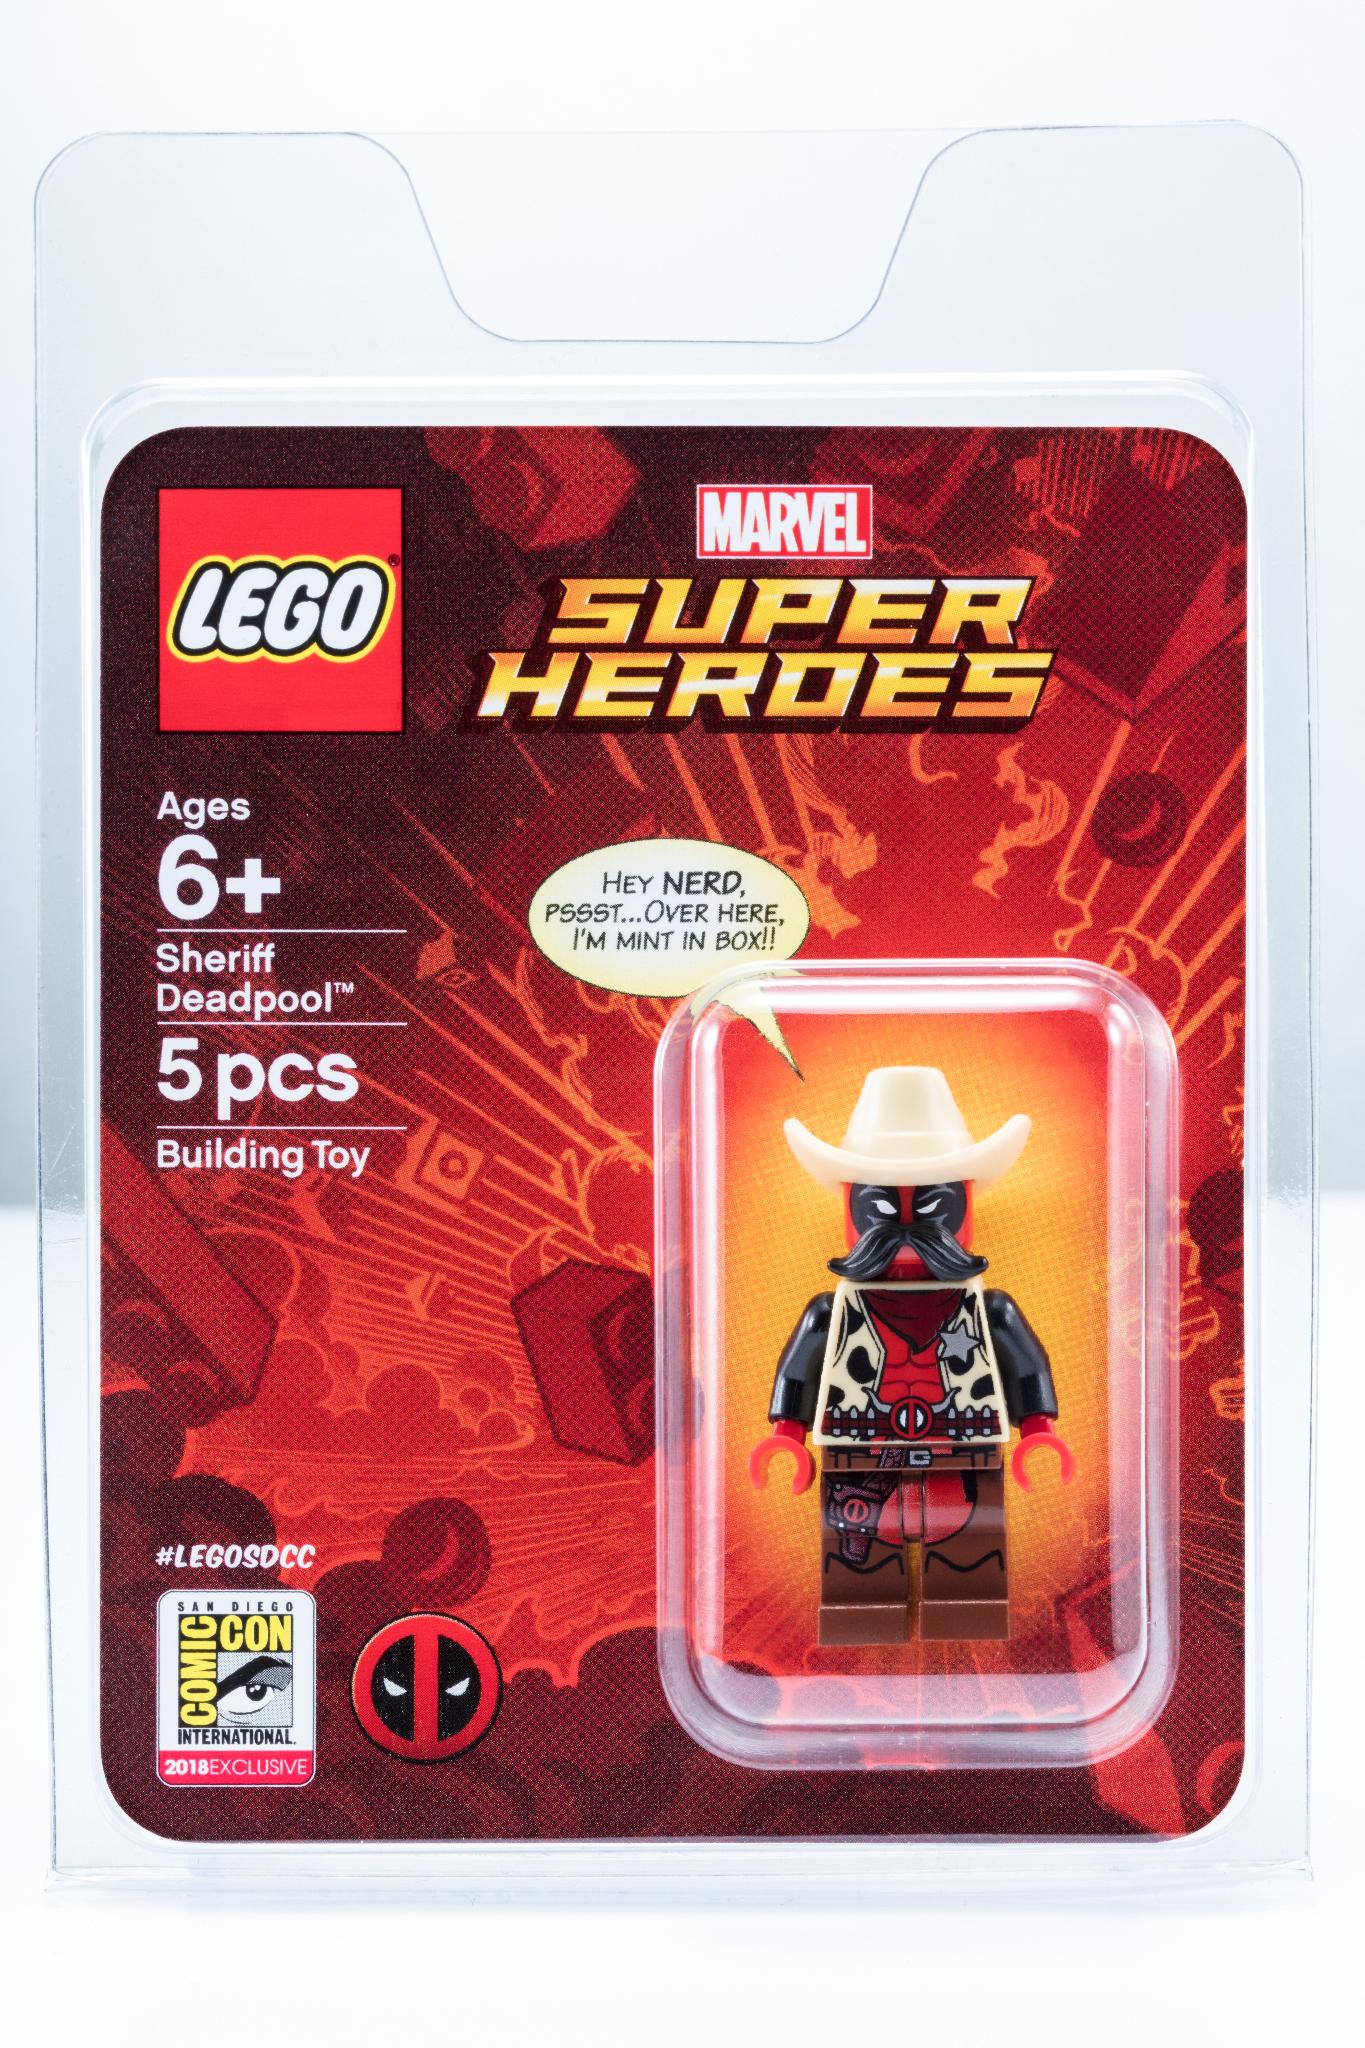 Sheriff Deadpool Is The First SDCC LEGO Minifig Exclusive Announced For 2018  - FBTB